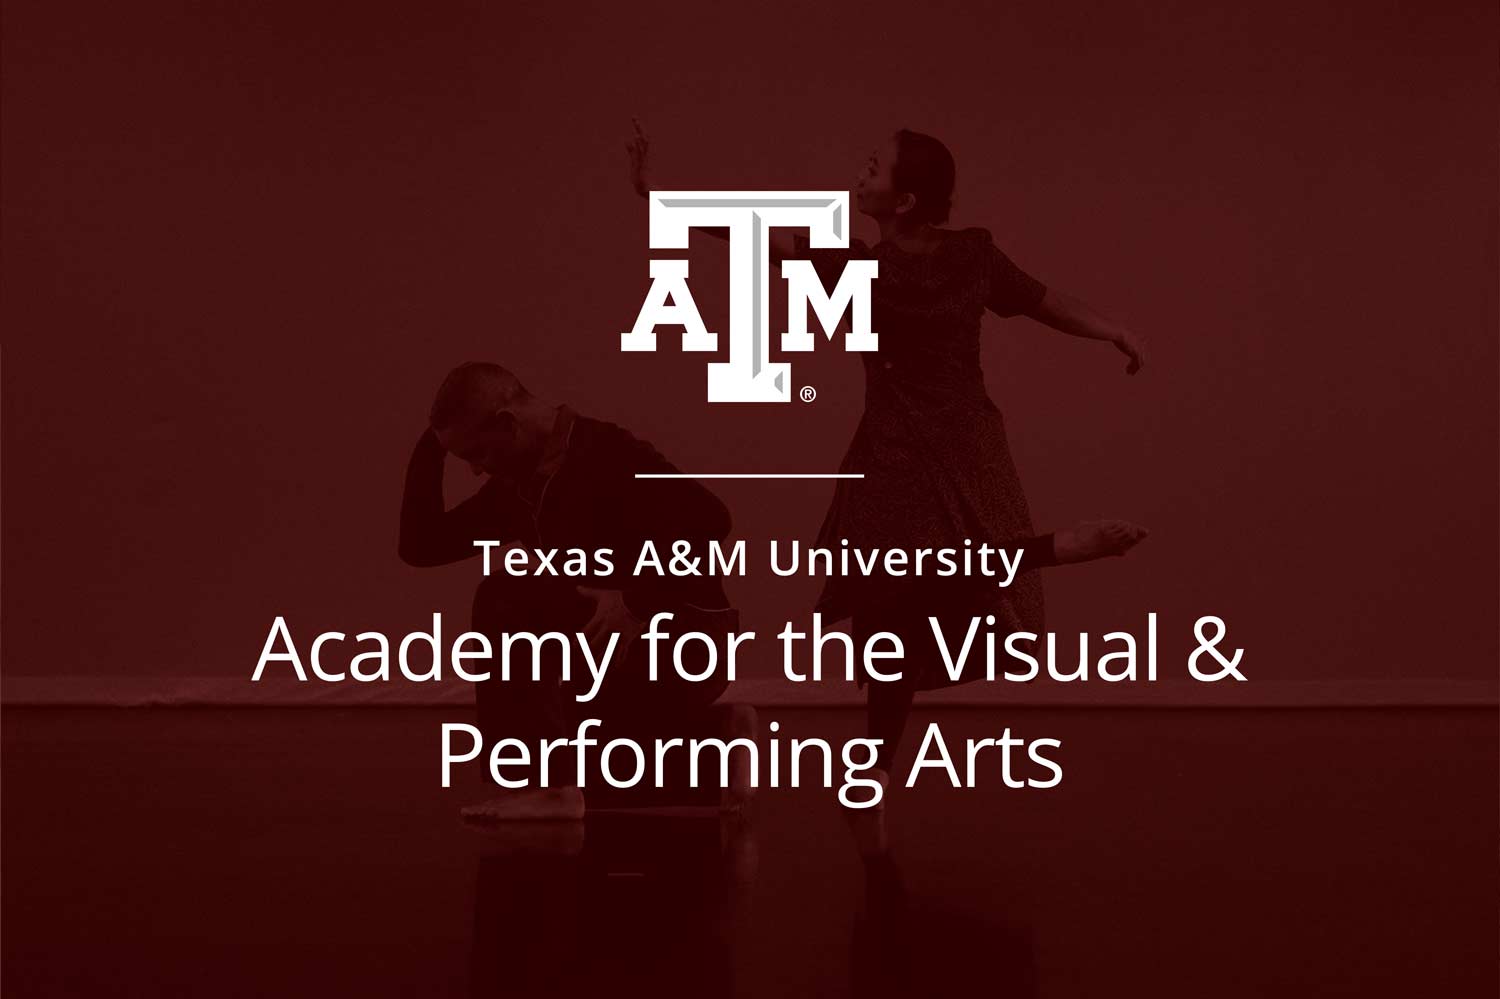 Branded image for the Academy for the Visual and Performing Arts at Texas A&amp;M University